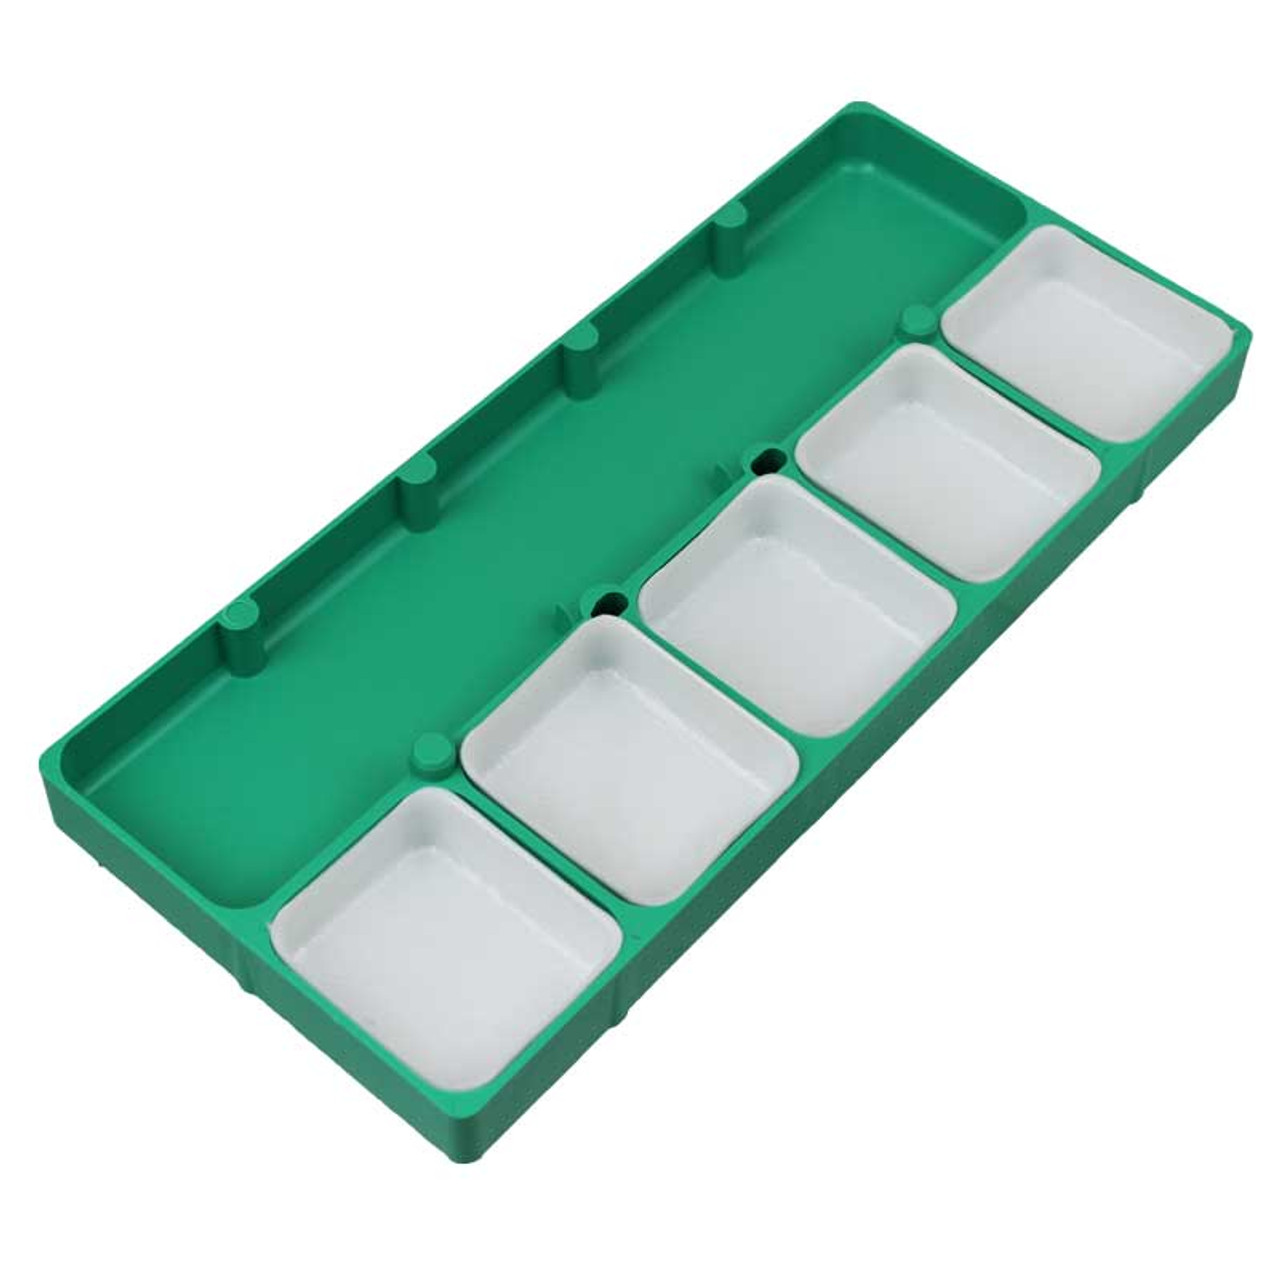 Watch Tray Components for 6 Compartment Trays Only - Locking